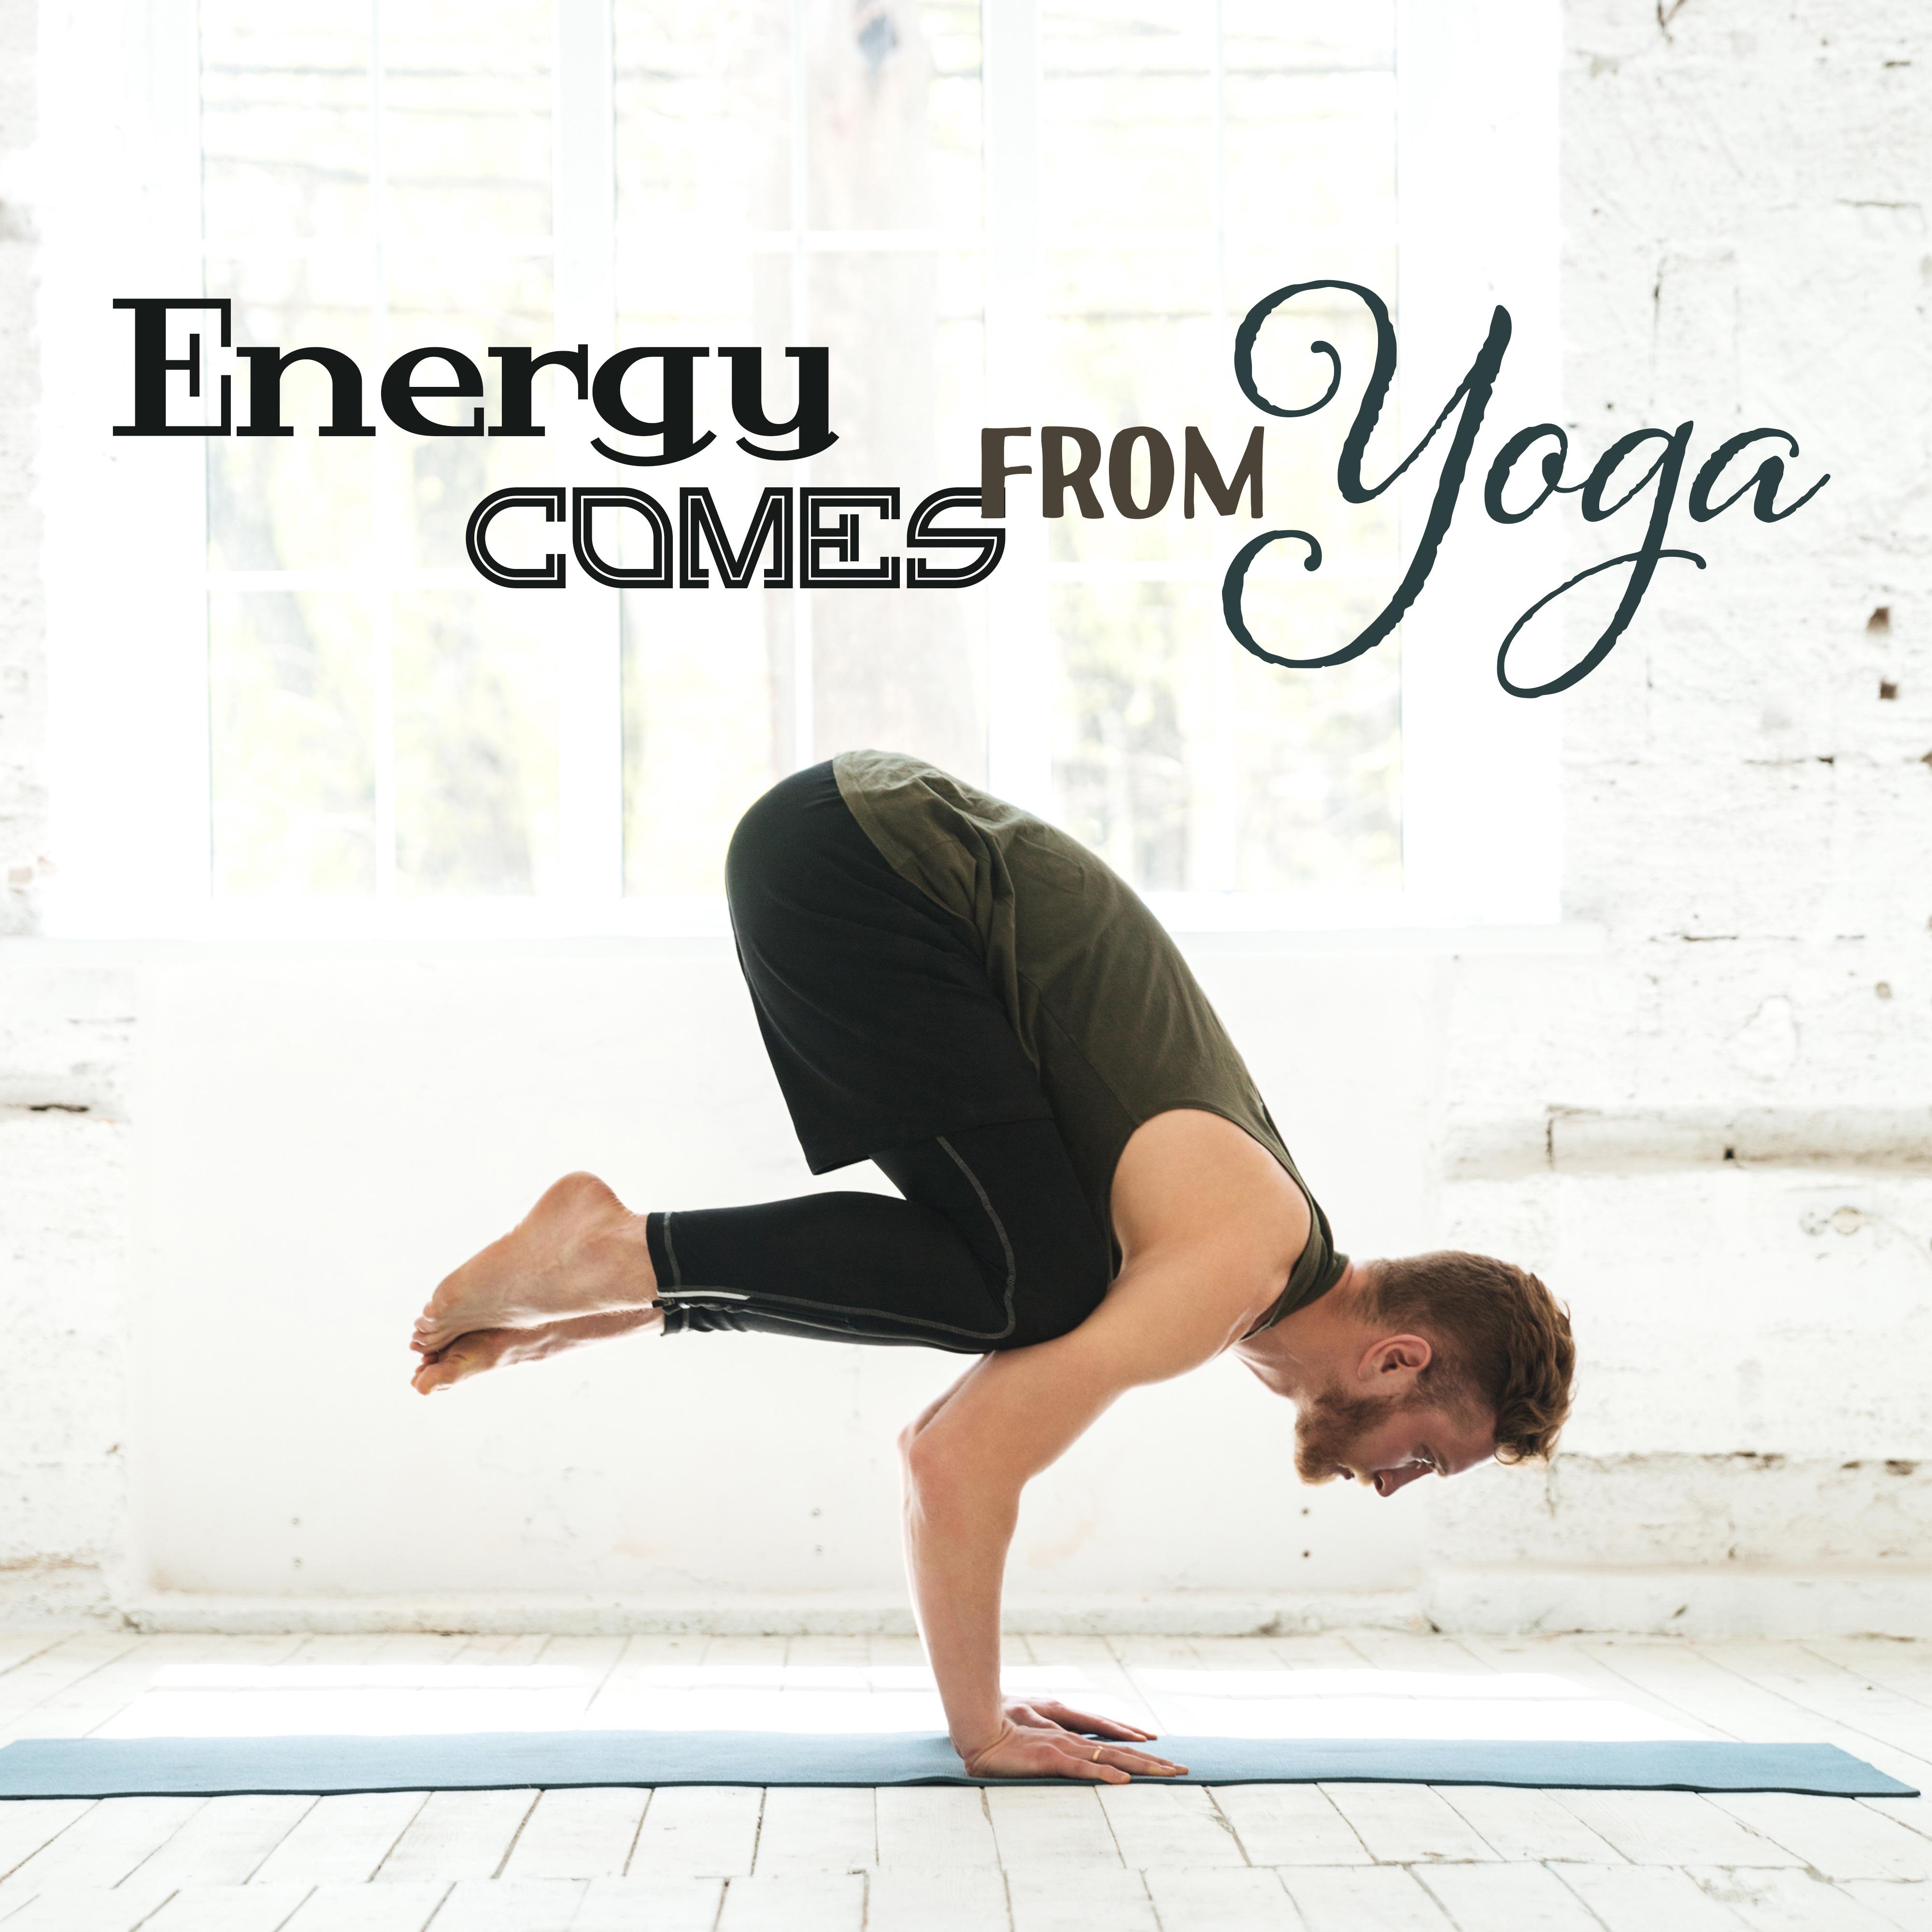 Energy Comes From Yoga